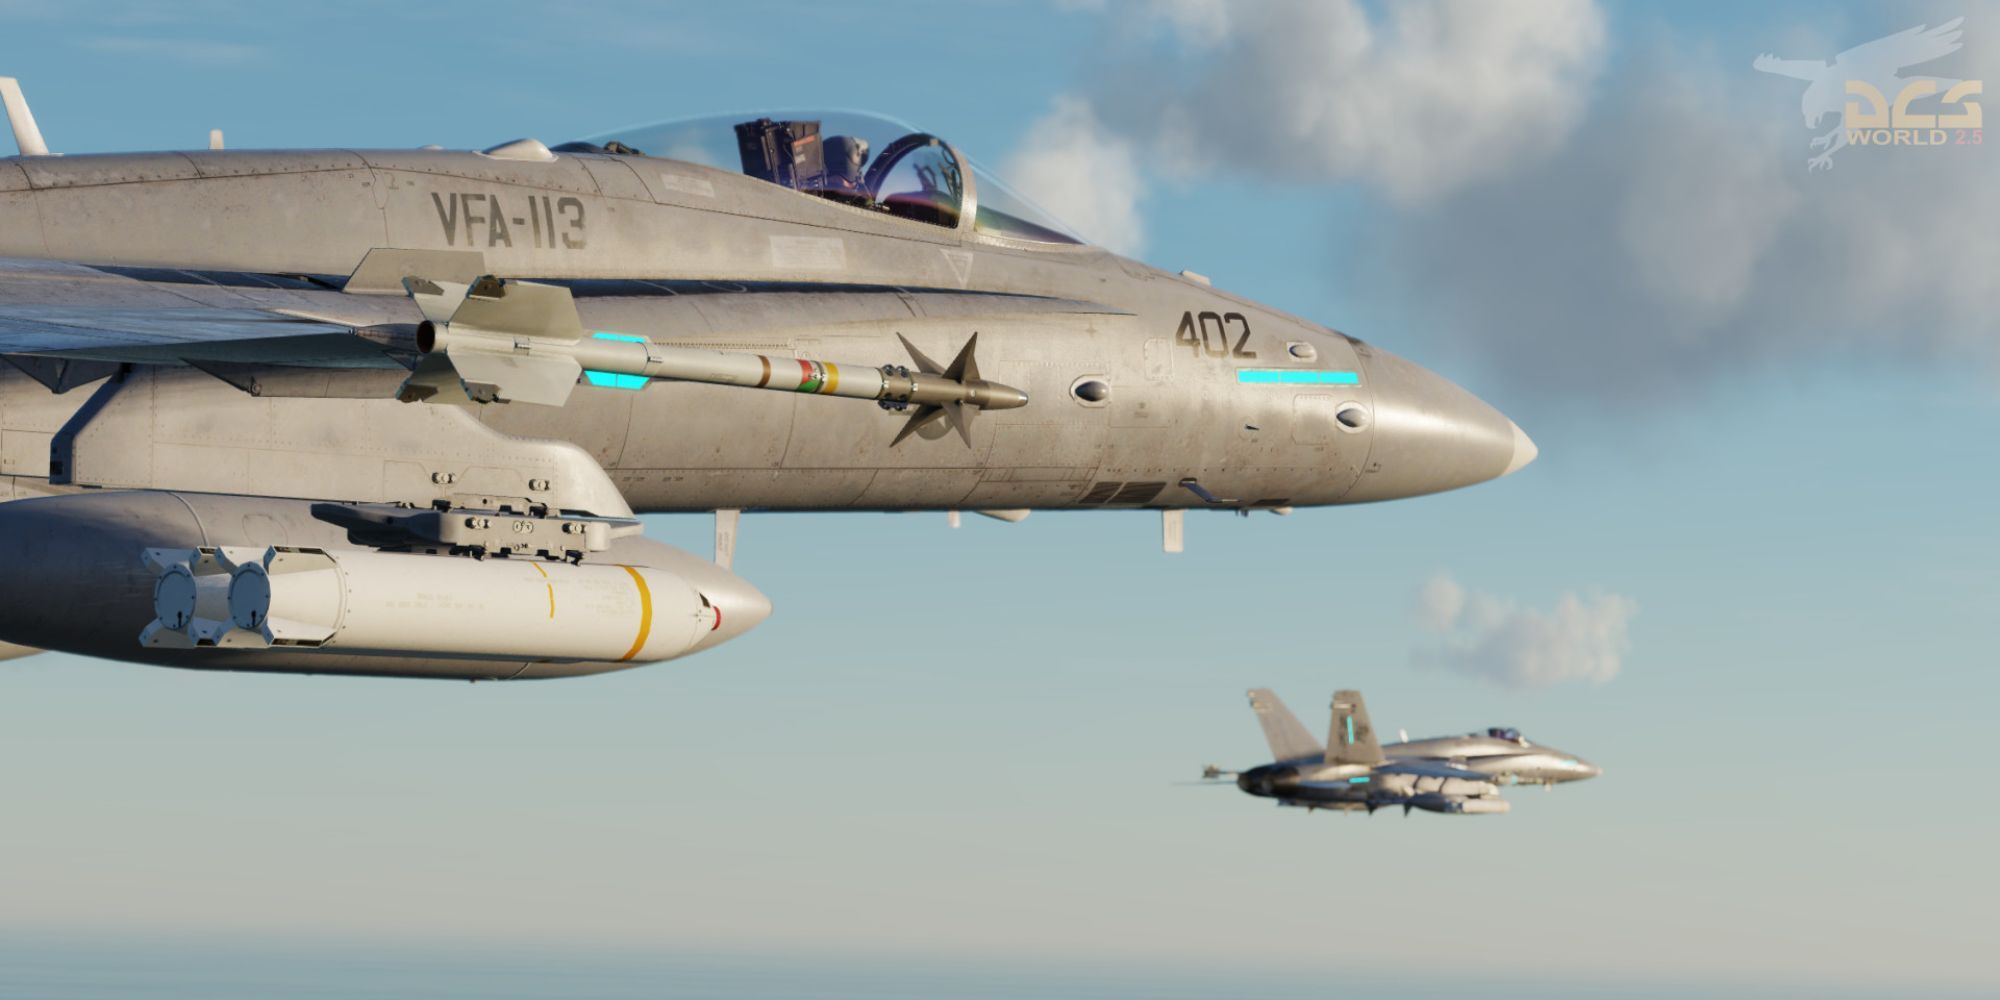 Two planes flying in DCS World